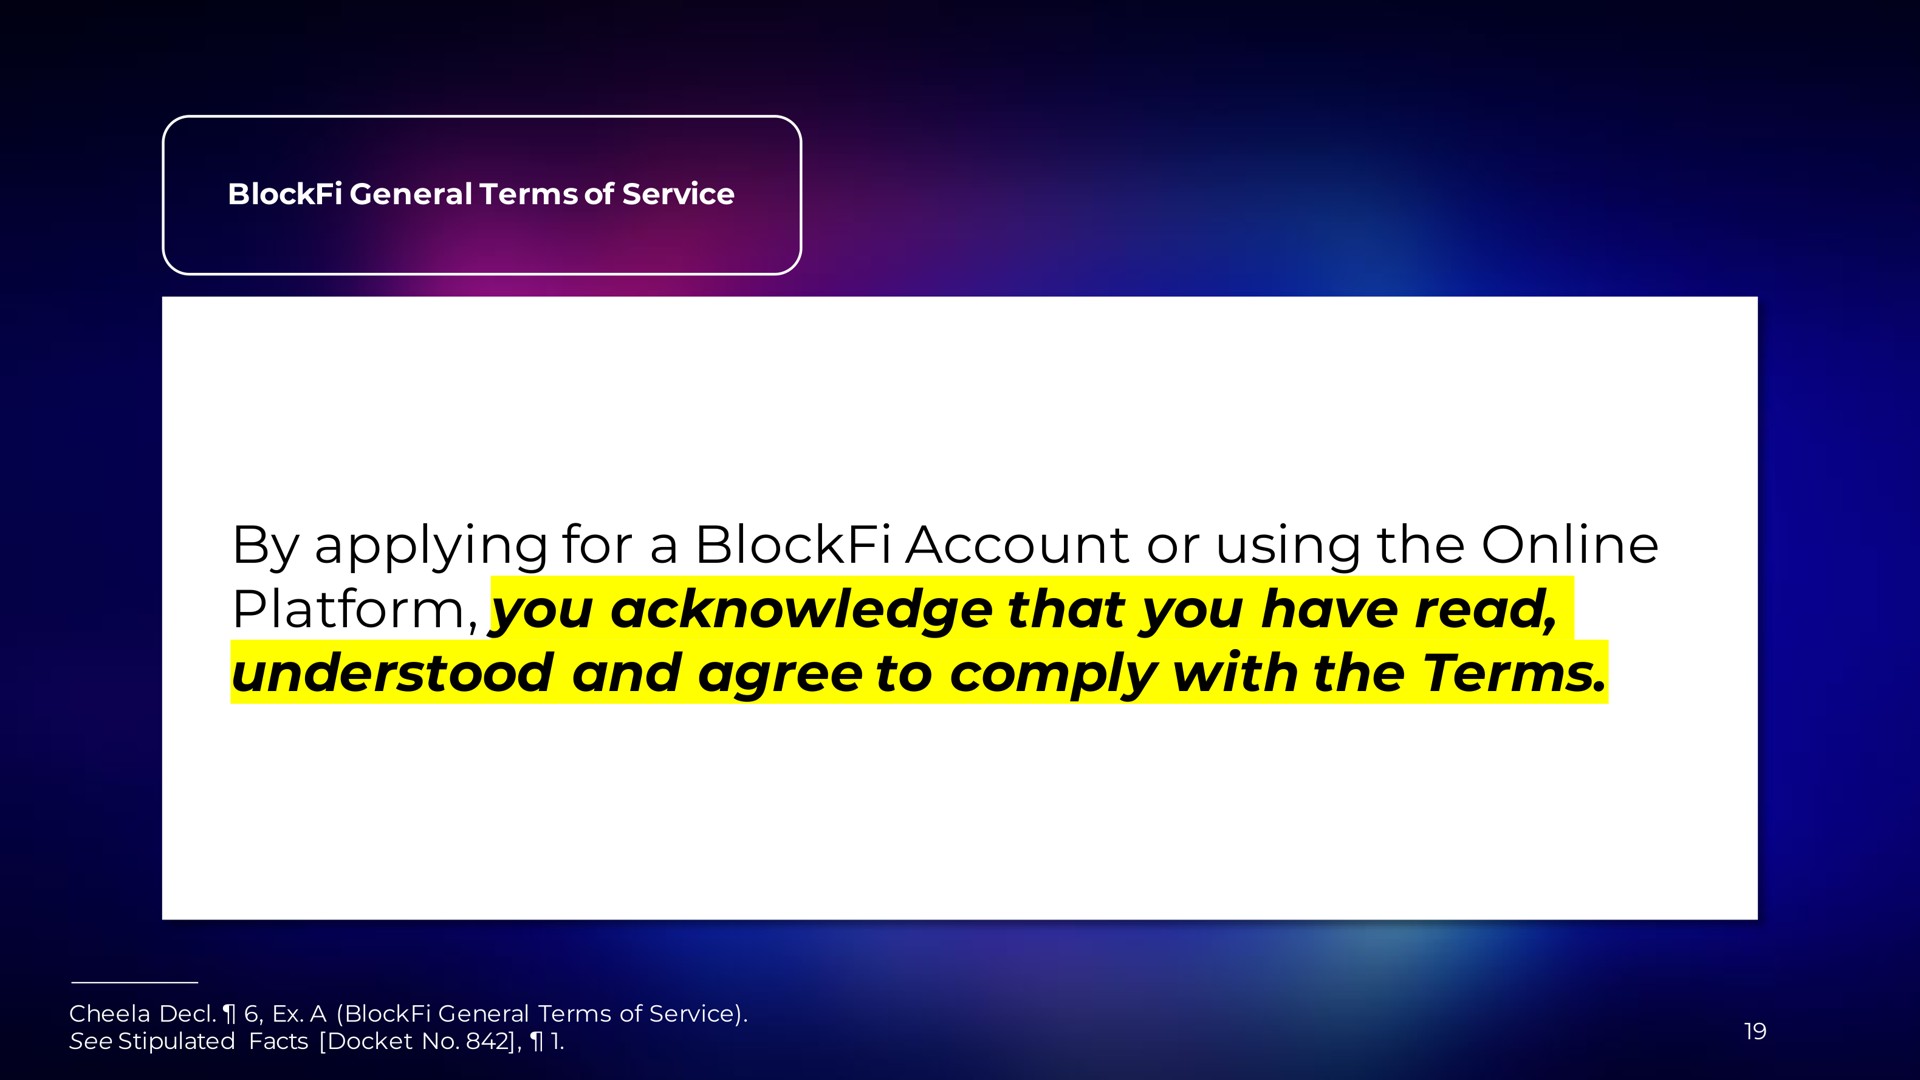 by applying for a account or using the platform you acknowledge that you have read understood and agree to comply with the terms | BlockFi